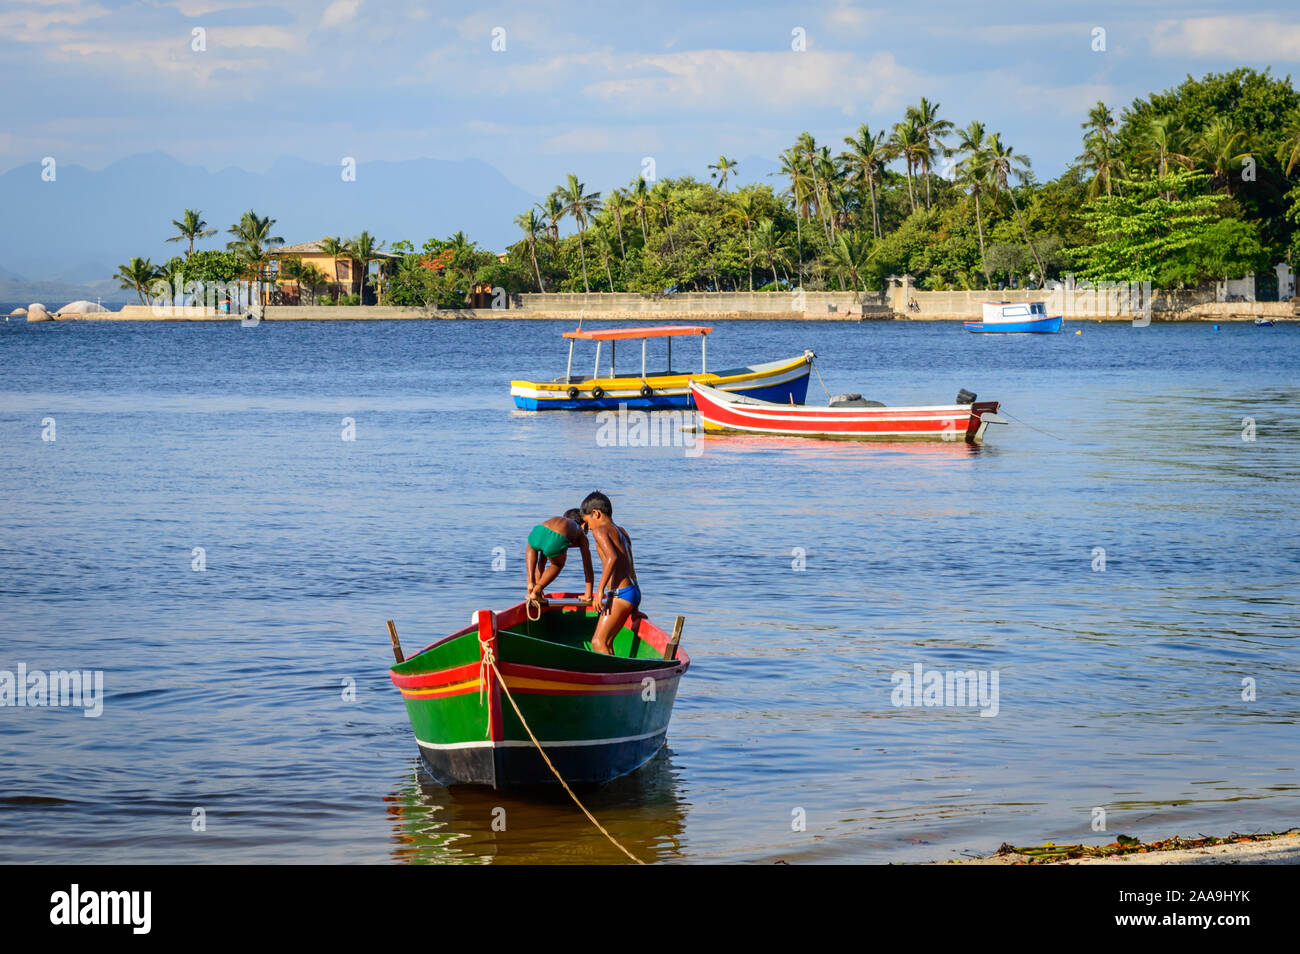 Two Brazilian boys in swimsuits playing in a wooden canoe at Paquetá Island, Rio de Janeiro, Brazil. Stock Photo